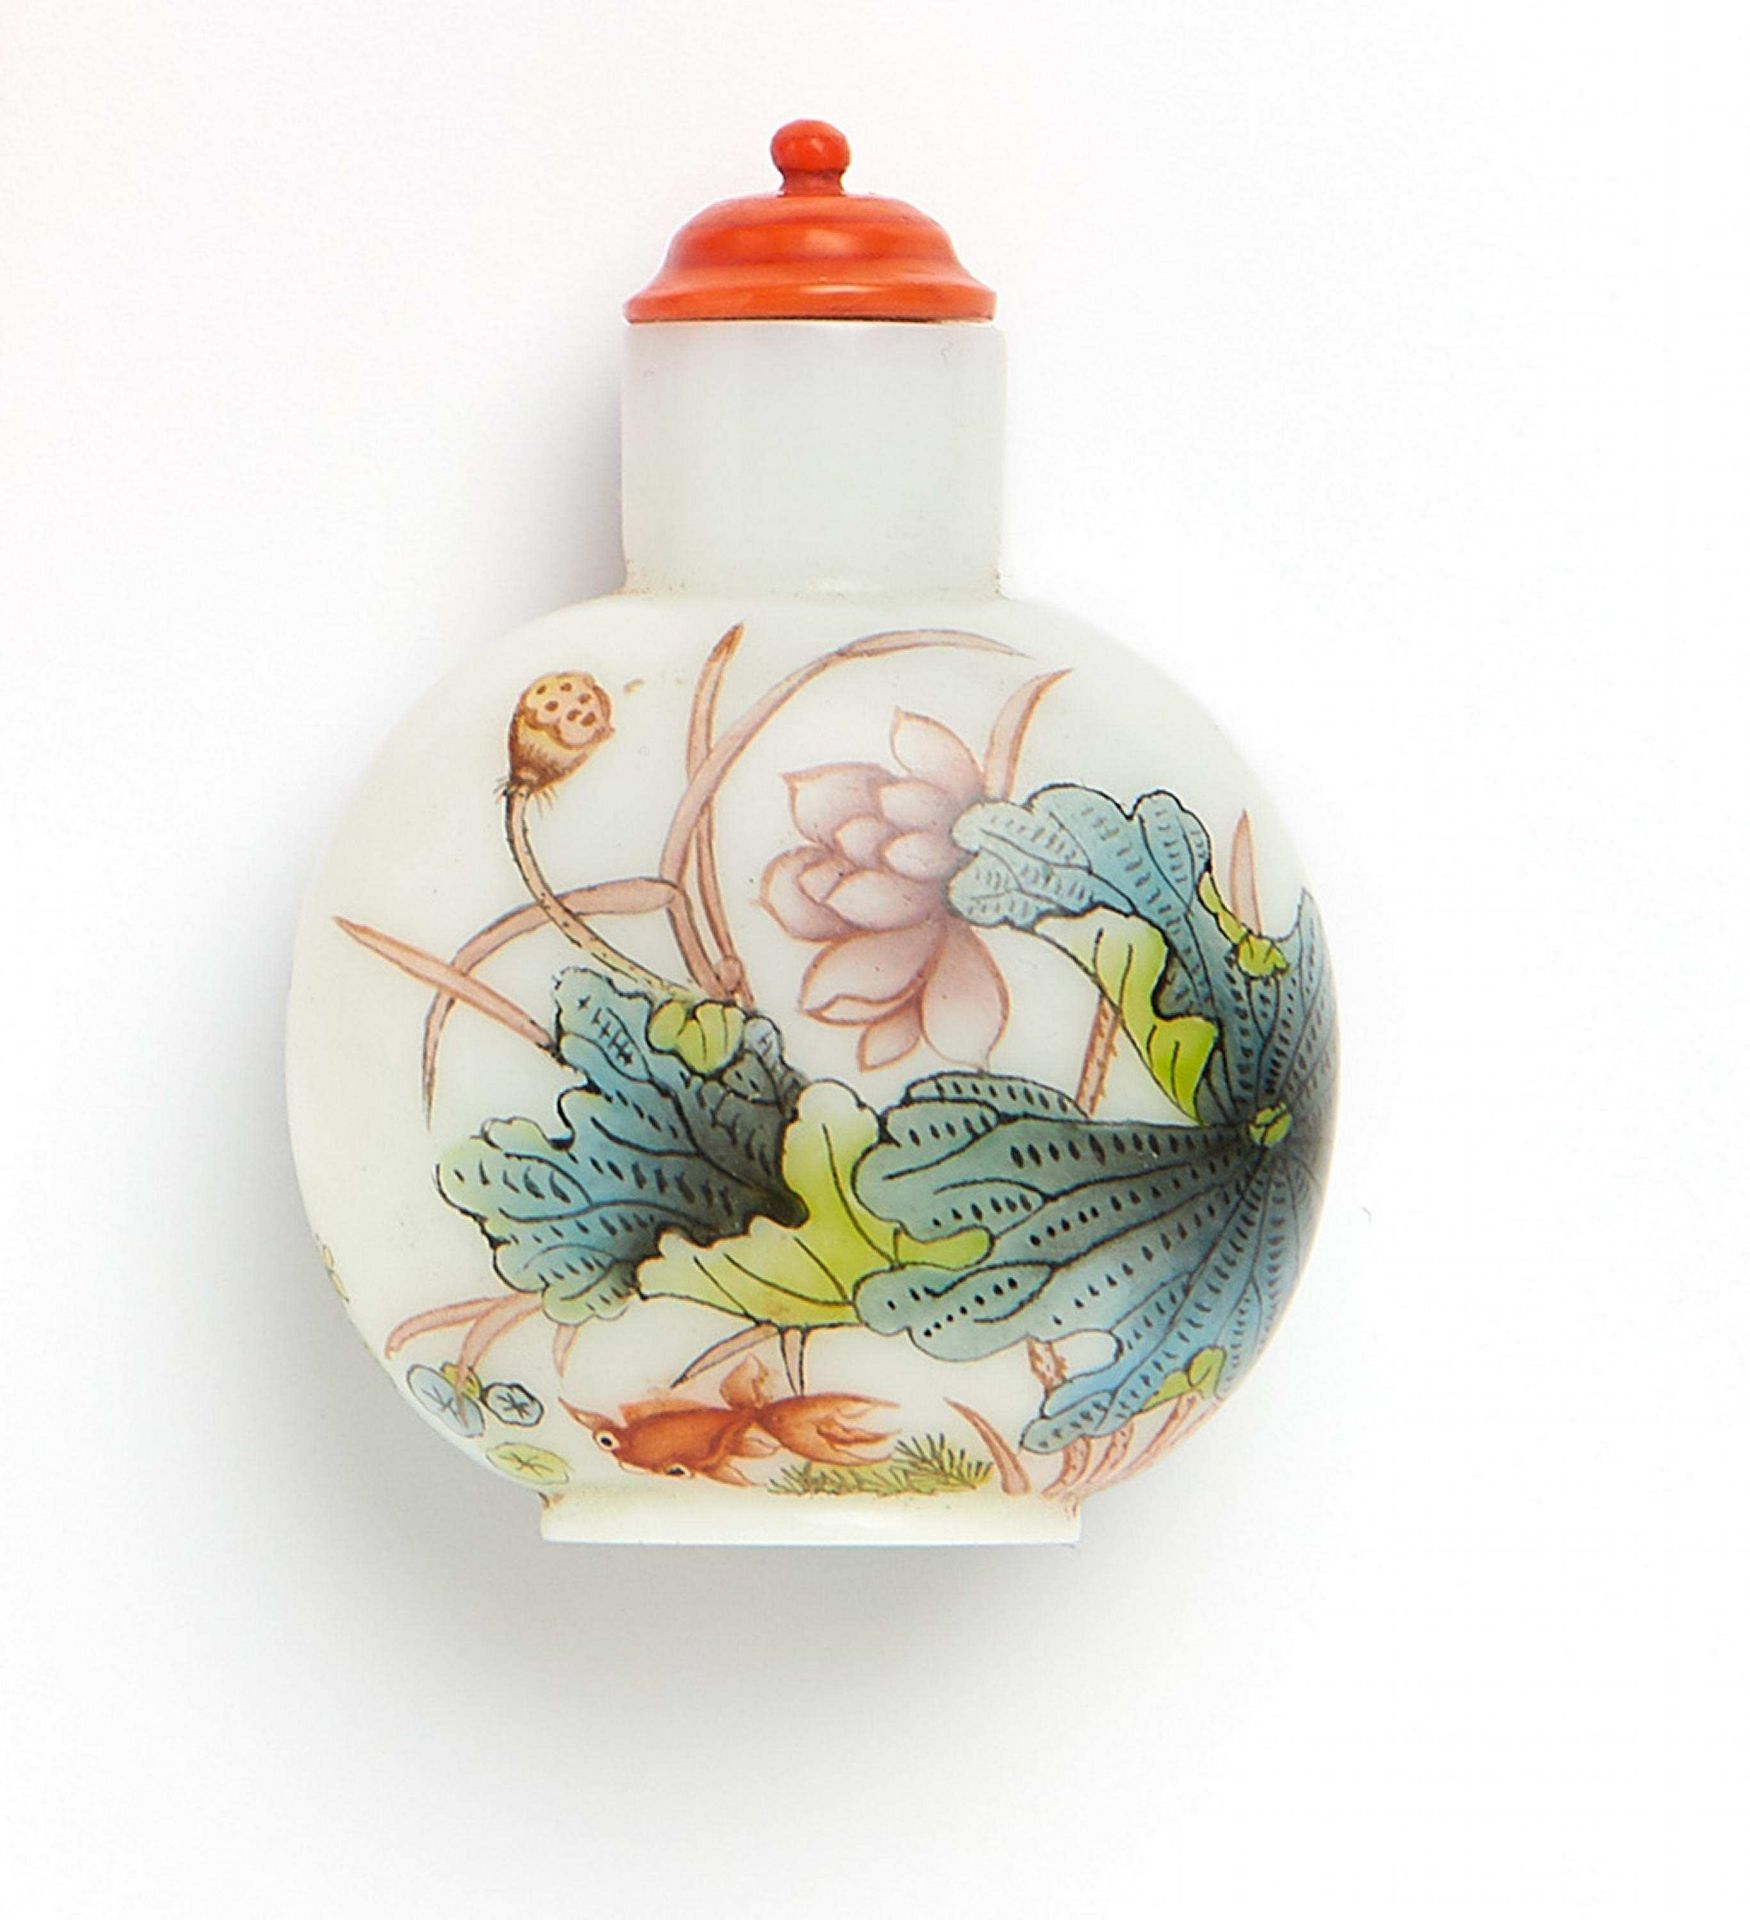 SNUFFBOTTLE WITH LOTUS AND GOLDFISH. China. Qing dynasty. Ca. 1850-1900. Glass with opaque white